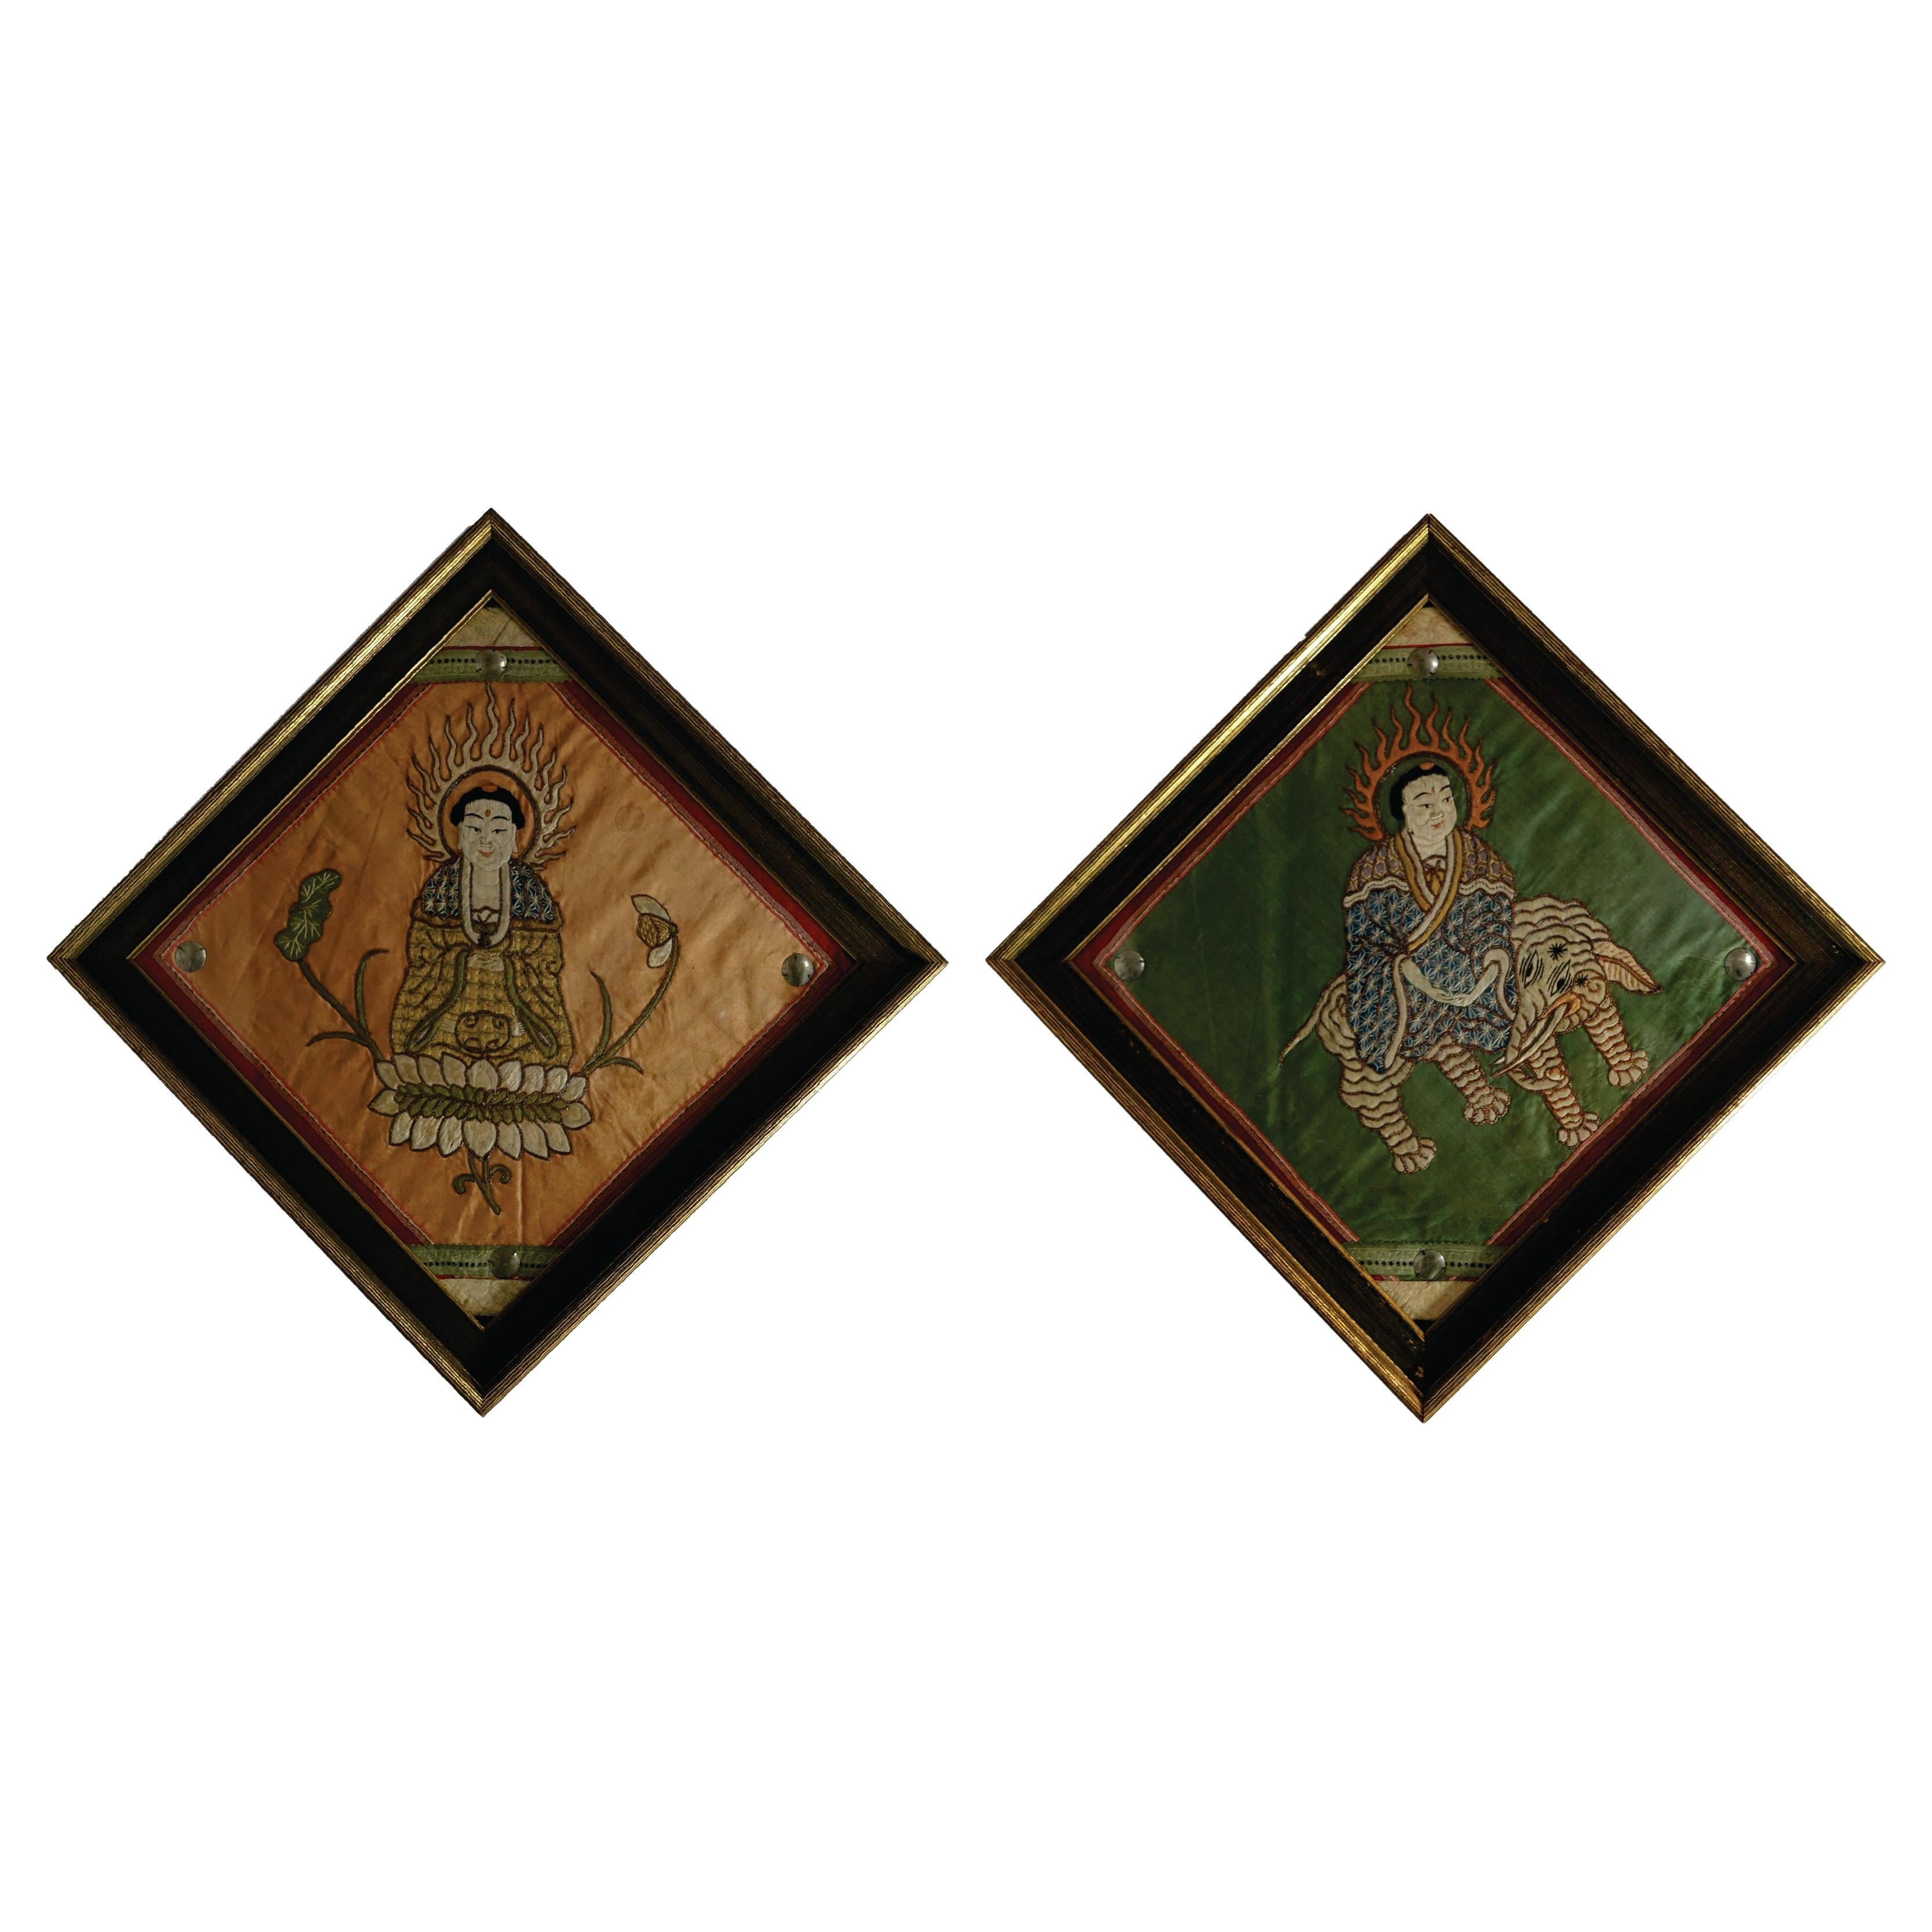 Antique pair of embroidered panels of Buddhas, presenting Buddha appears in two different forms, one is sitting on the lotus and one is ridding on a mythological creature. They are framed and with glass.